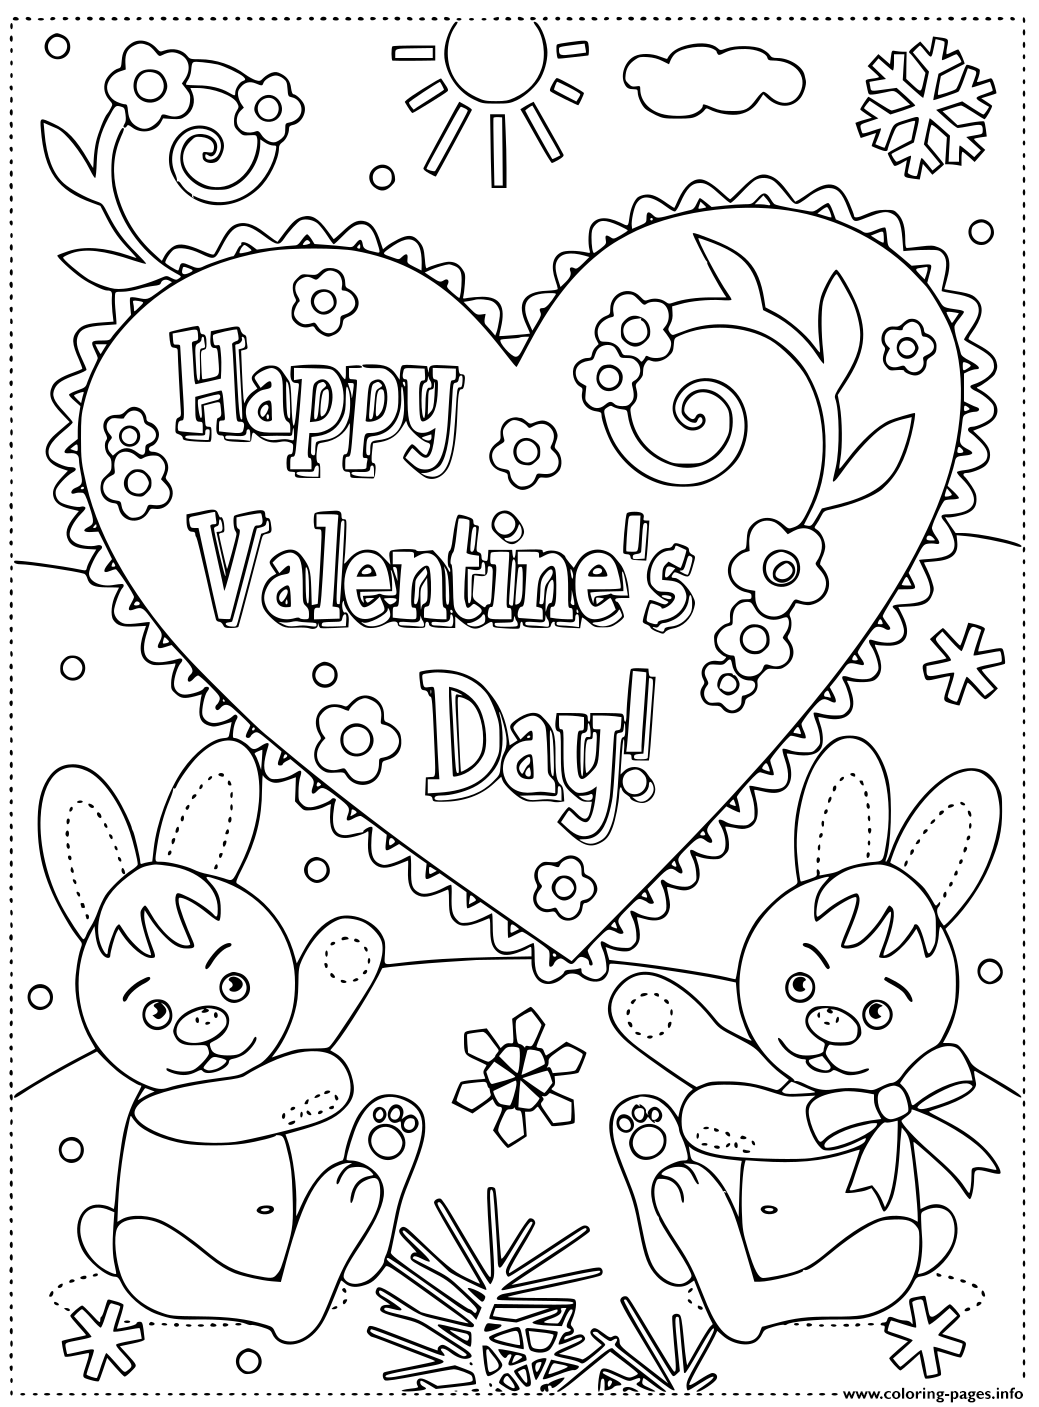 Happy Valentines Day From Rabbit coloring